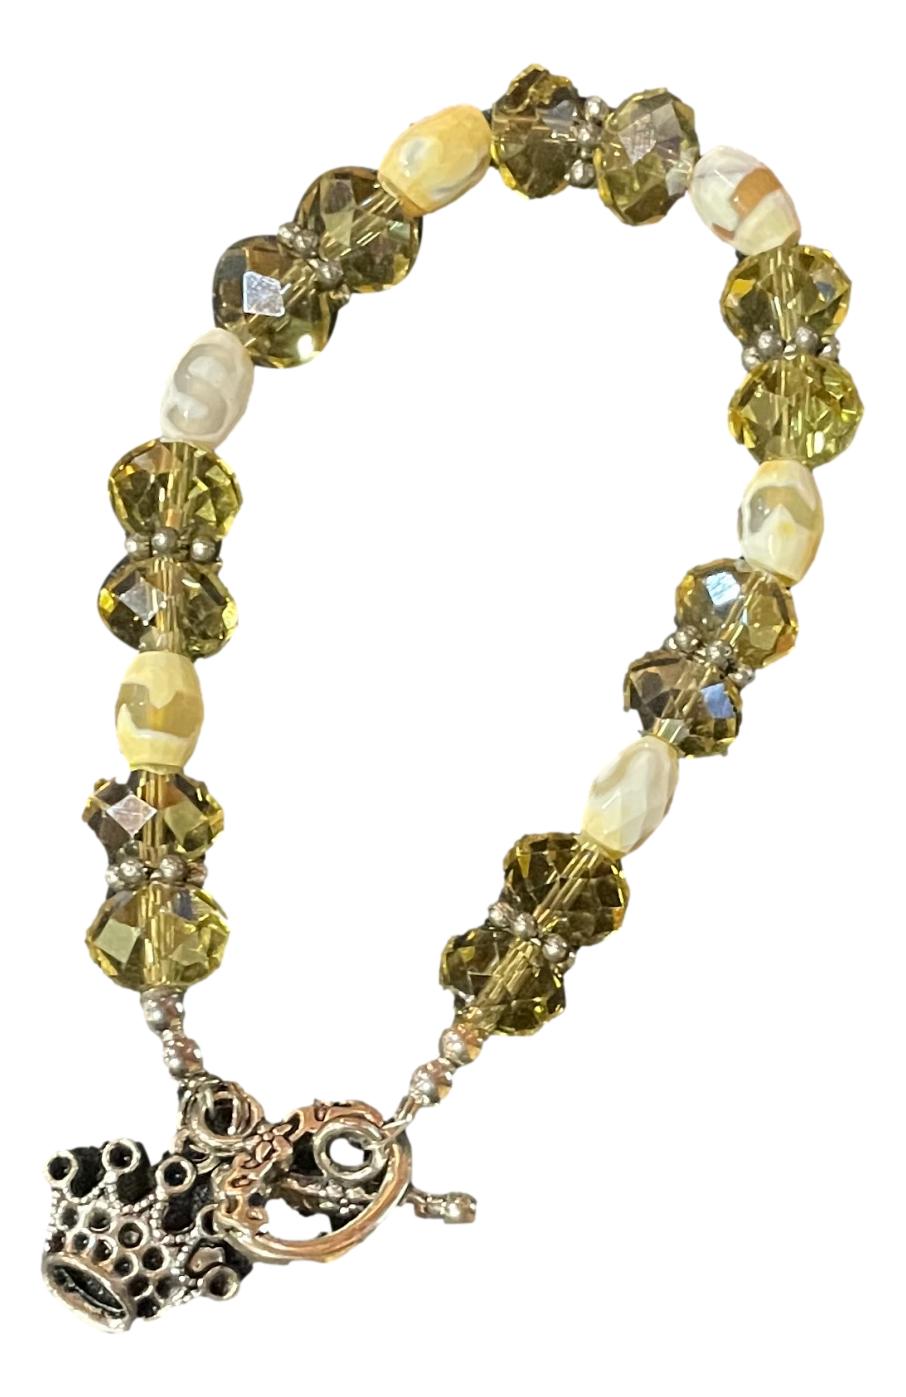 Rosary Bracelet Clear Yellow Glass Beads Barrel Beads Silver Accent Crown Medallion - Ysleta Mission Gift Shop- VOTED El Paso's Best Gift Shop